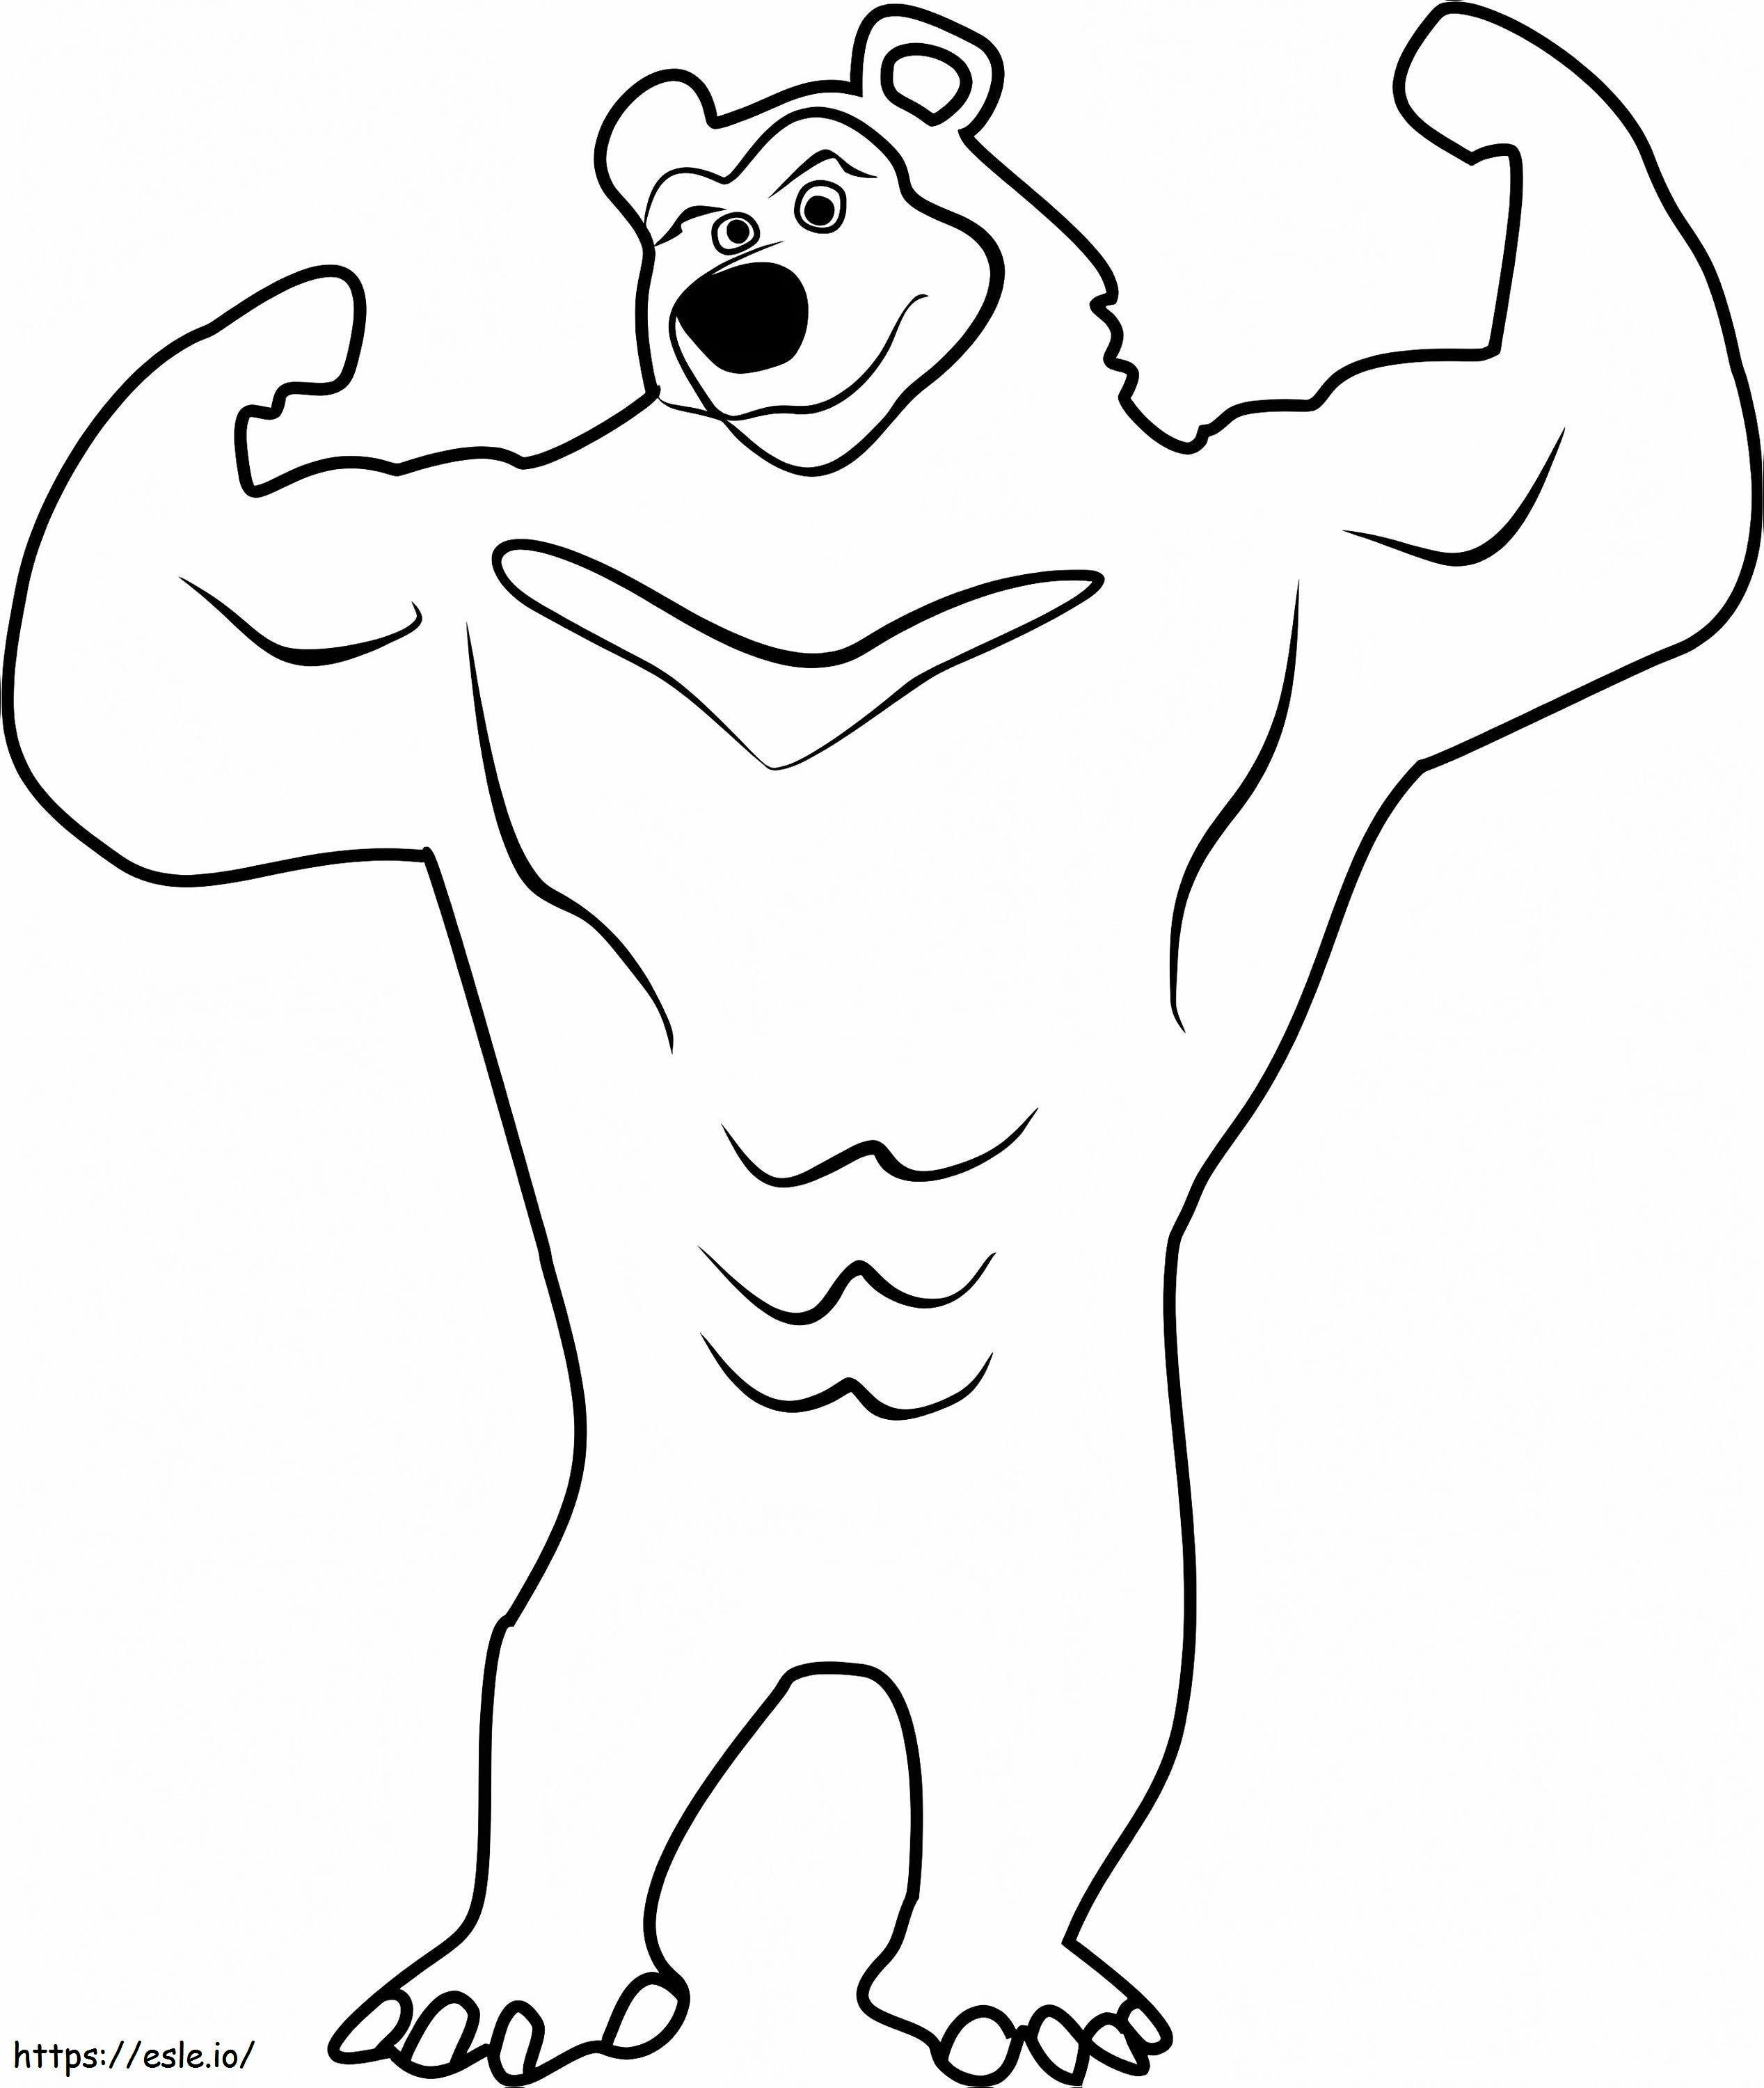 The Black Bear coloring page